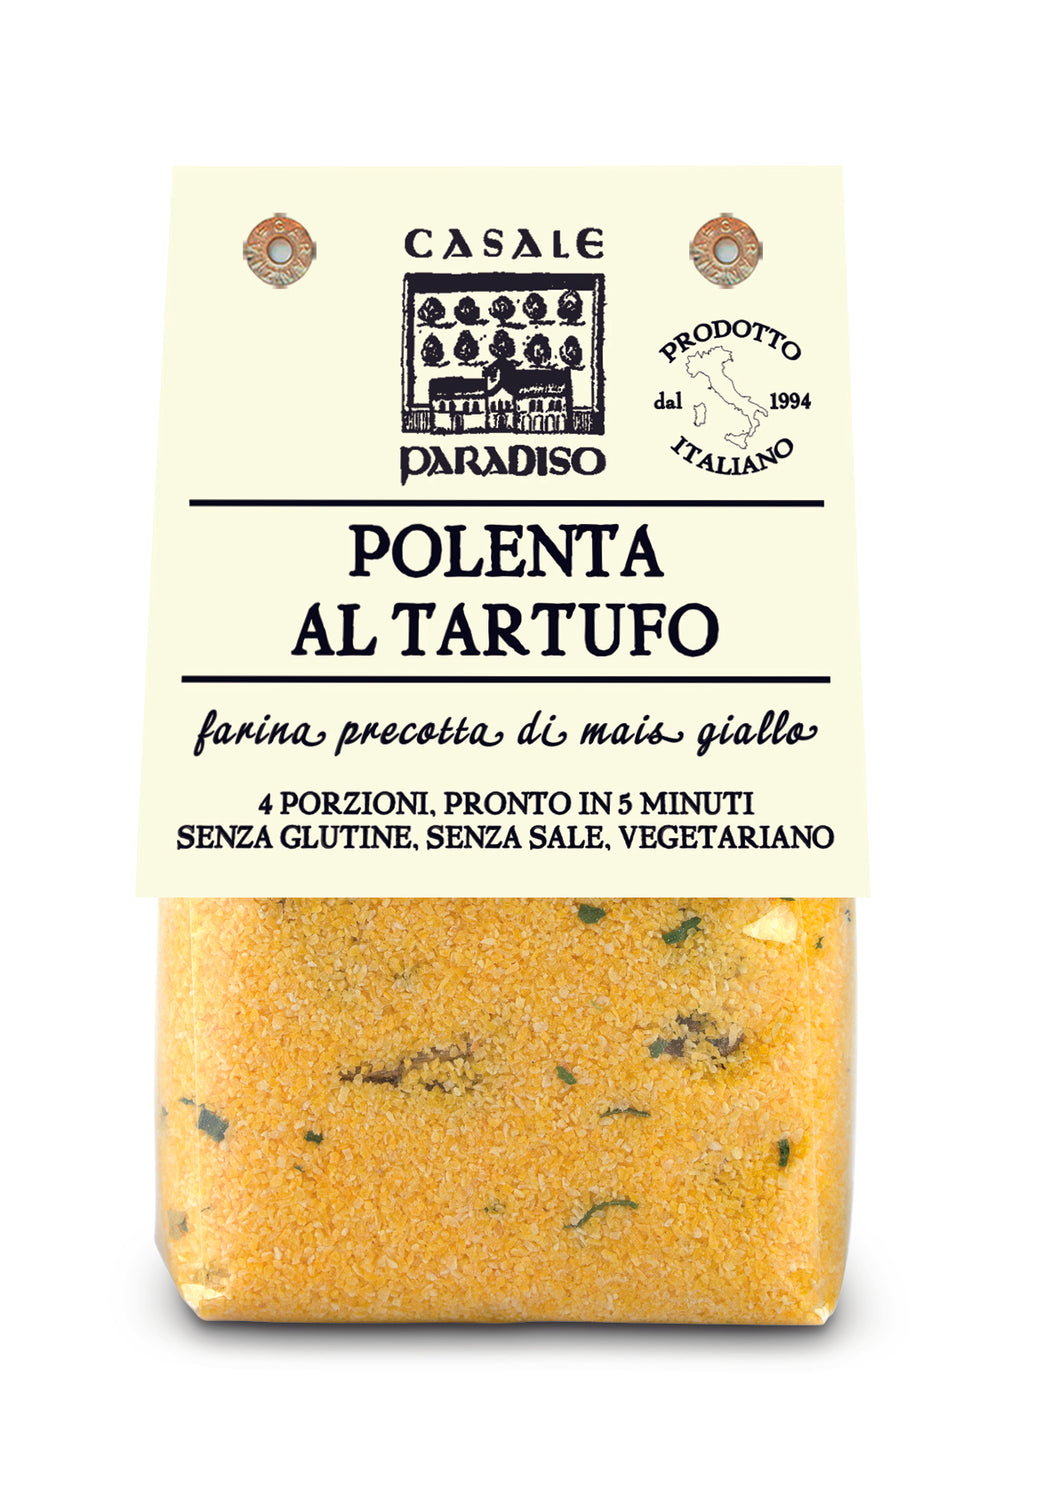 Polenta with Truffle, By Casale Paradiso 10.58 oz